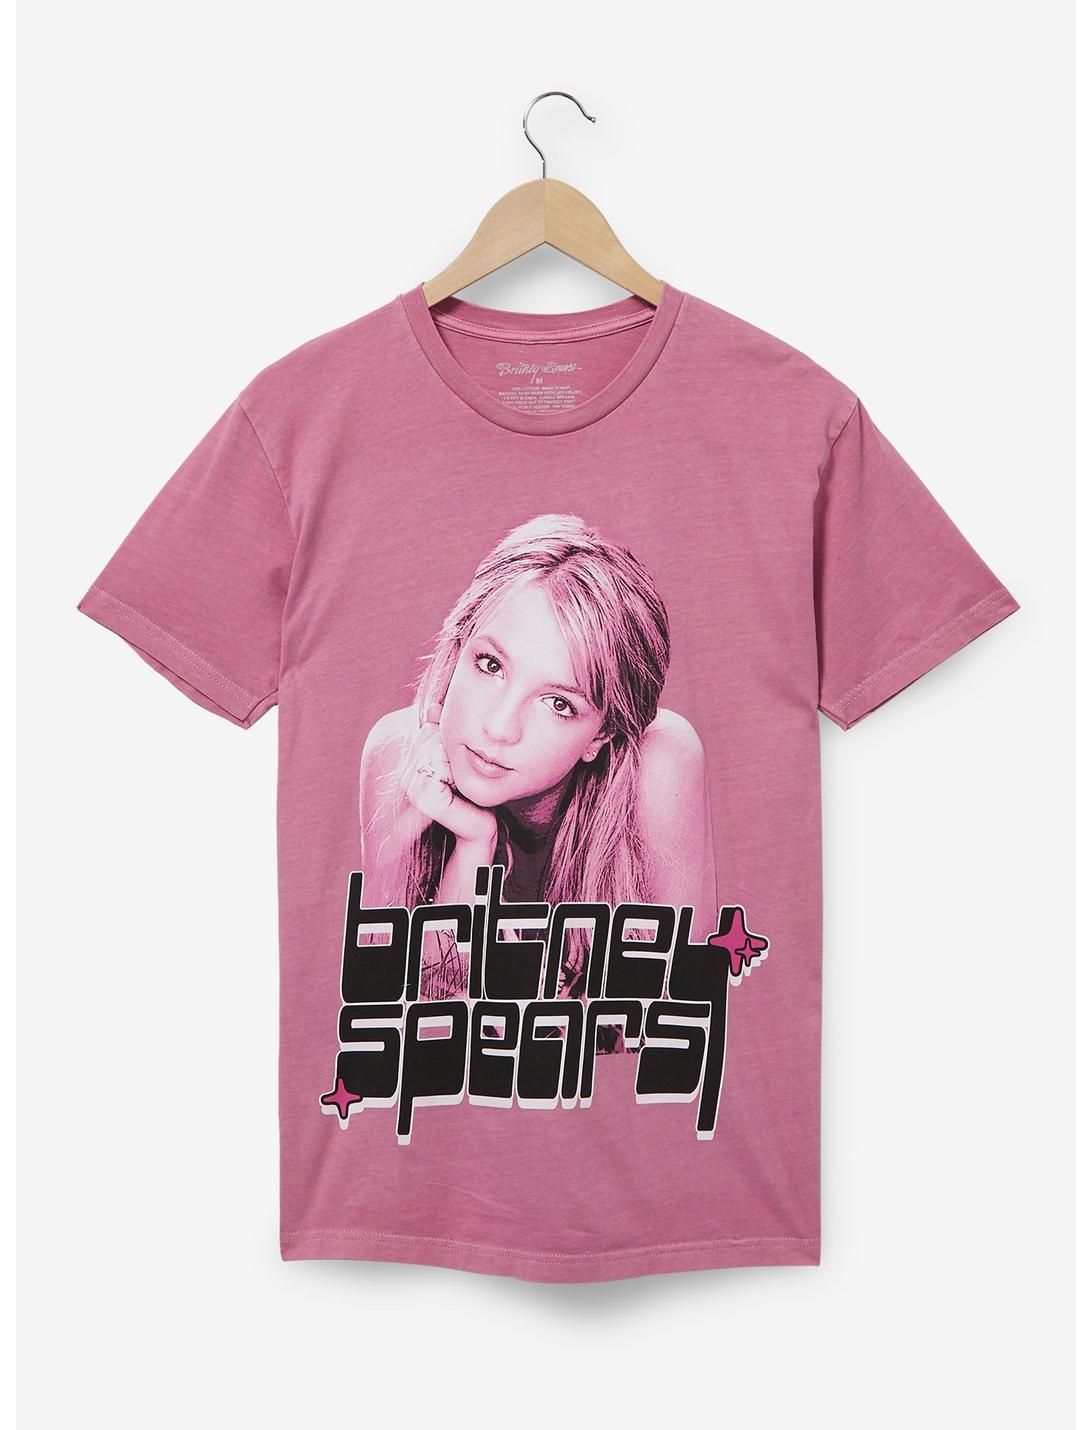 Britney Spears Tonal Portrait T-Shirt - BoxLunch Exclusive, PINK, hi-res